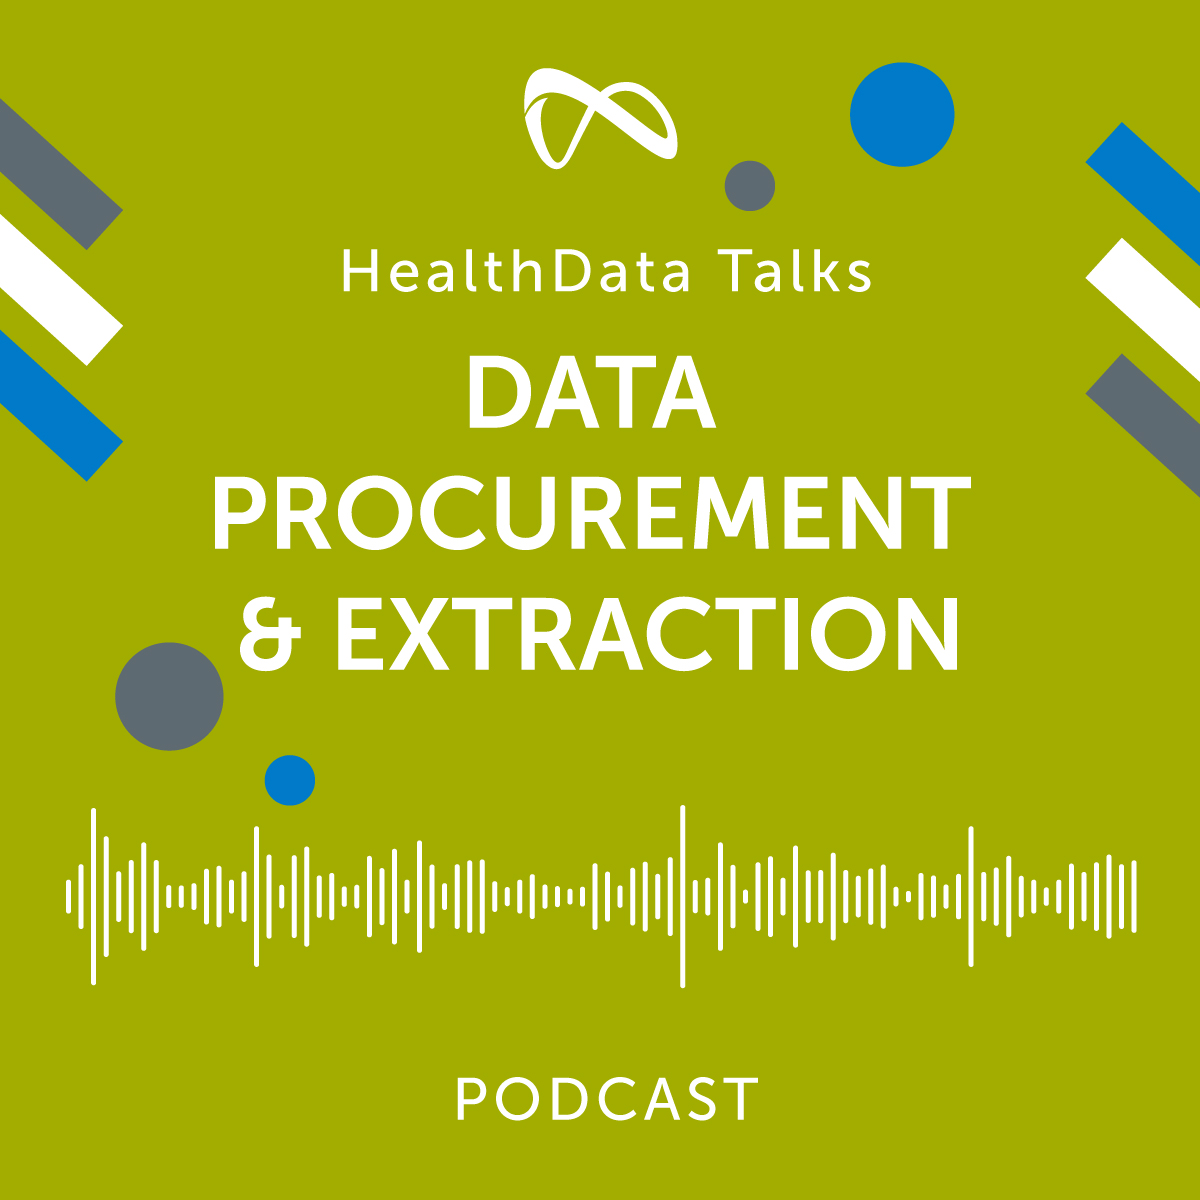 Data Procurement and Extraction